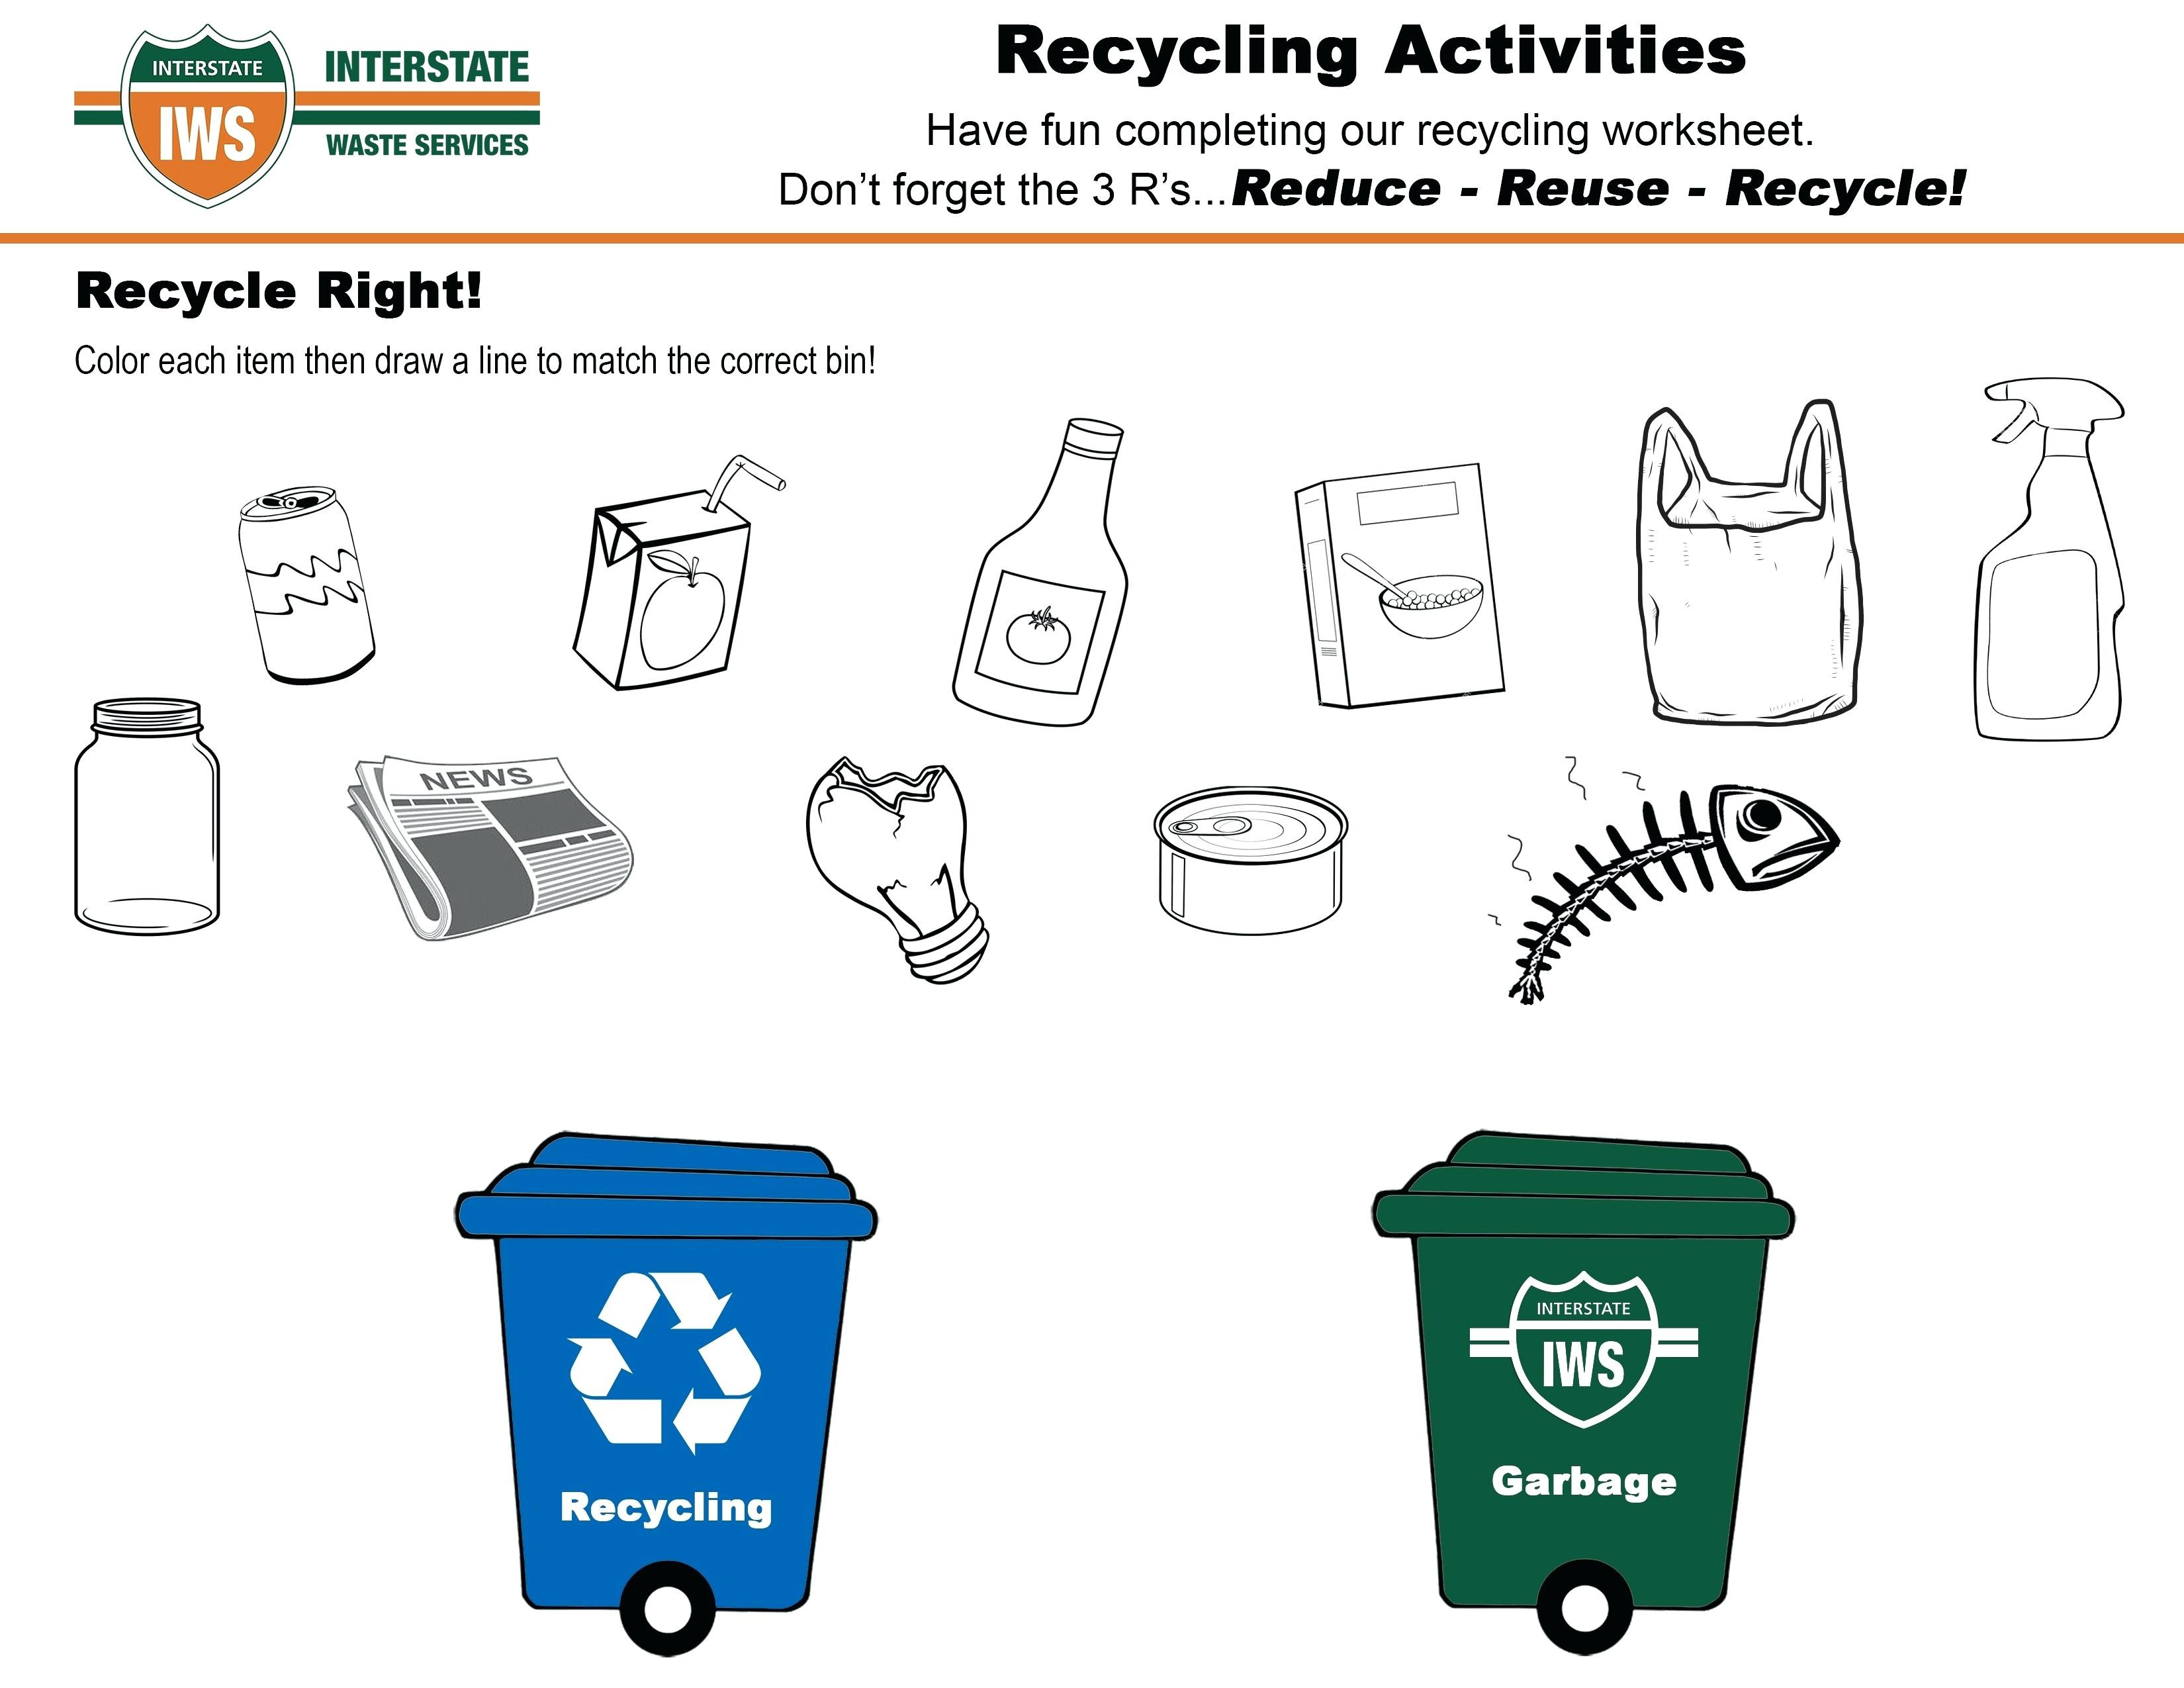 T me daily bins. Reduce reuse recycle Worksheets for Kids. Reduce reuse recycle Worksheet. Recycling задания.